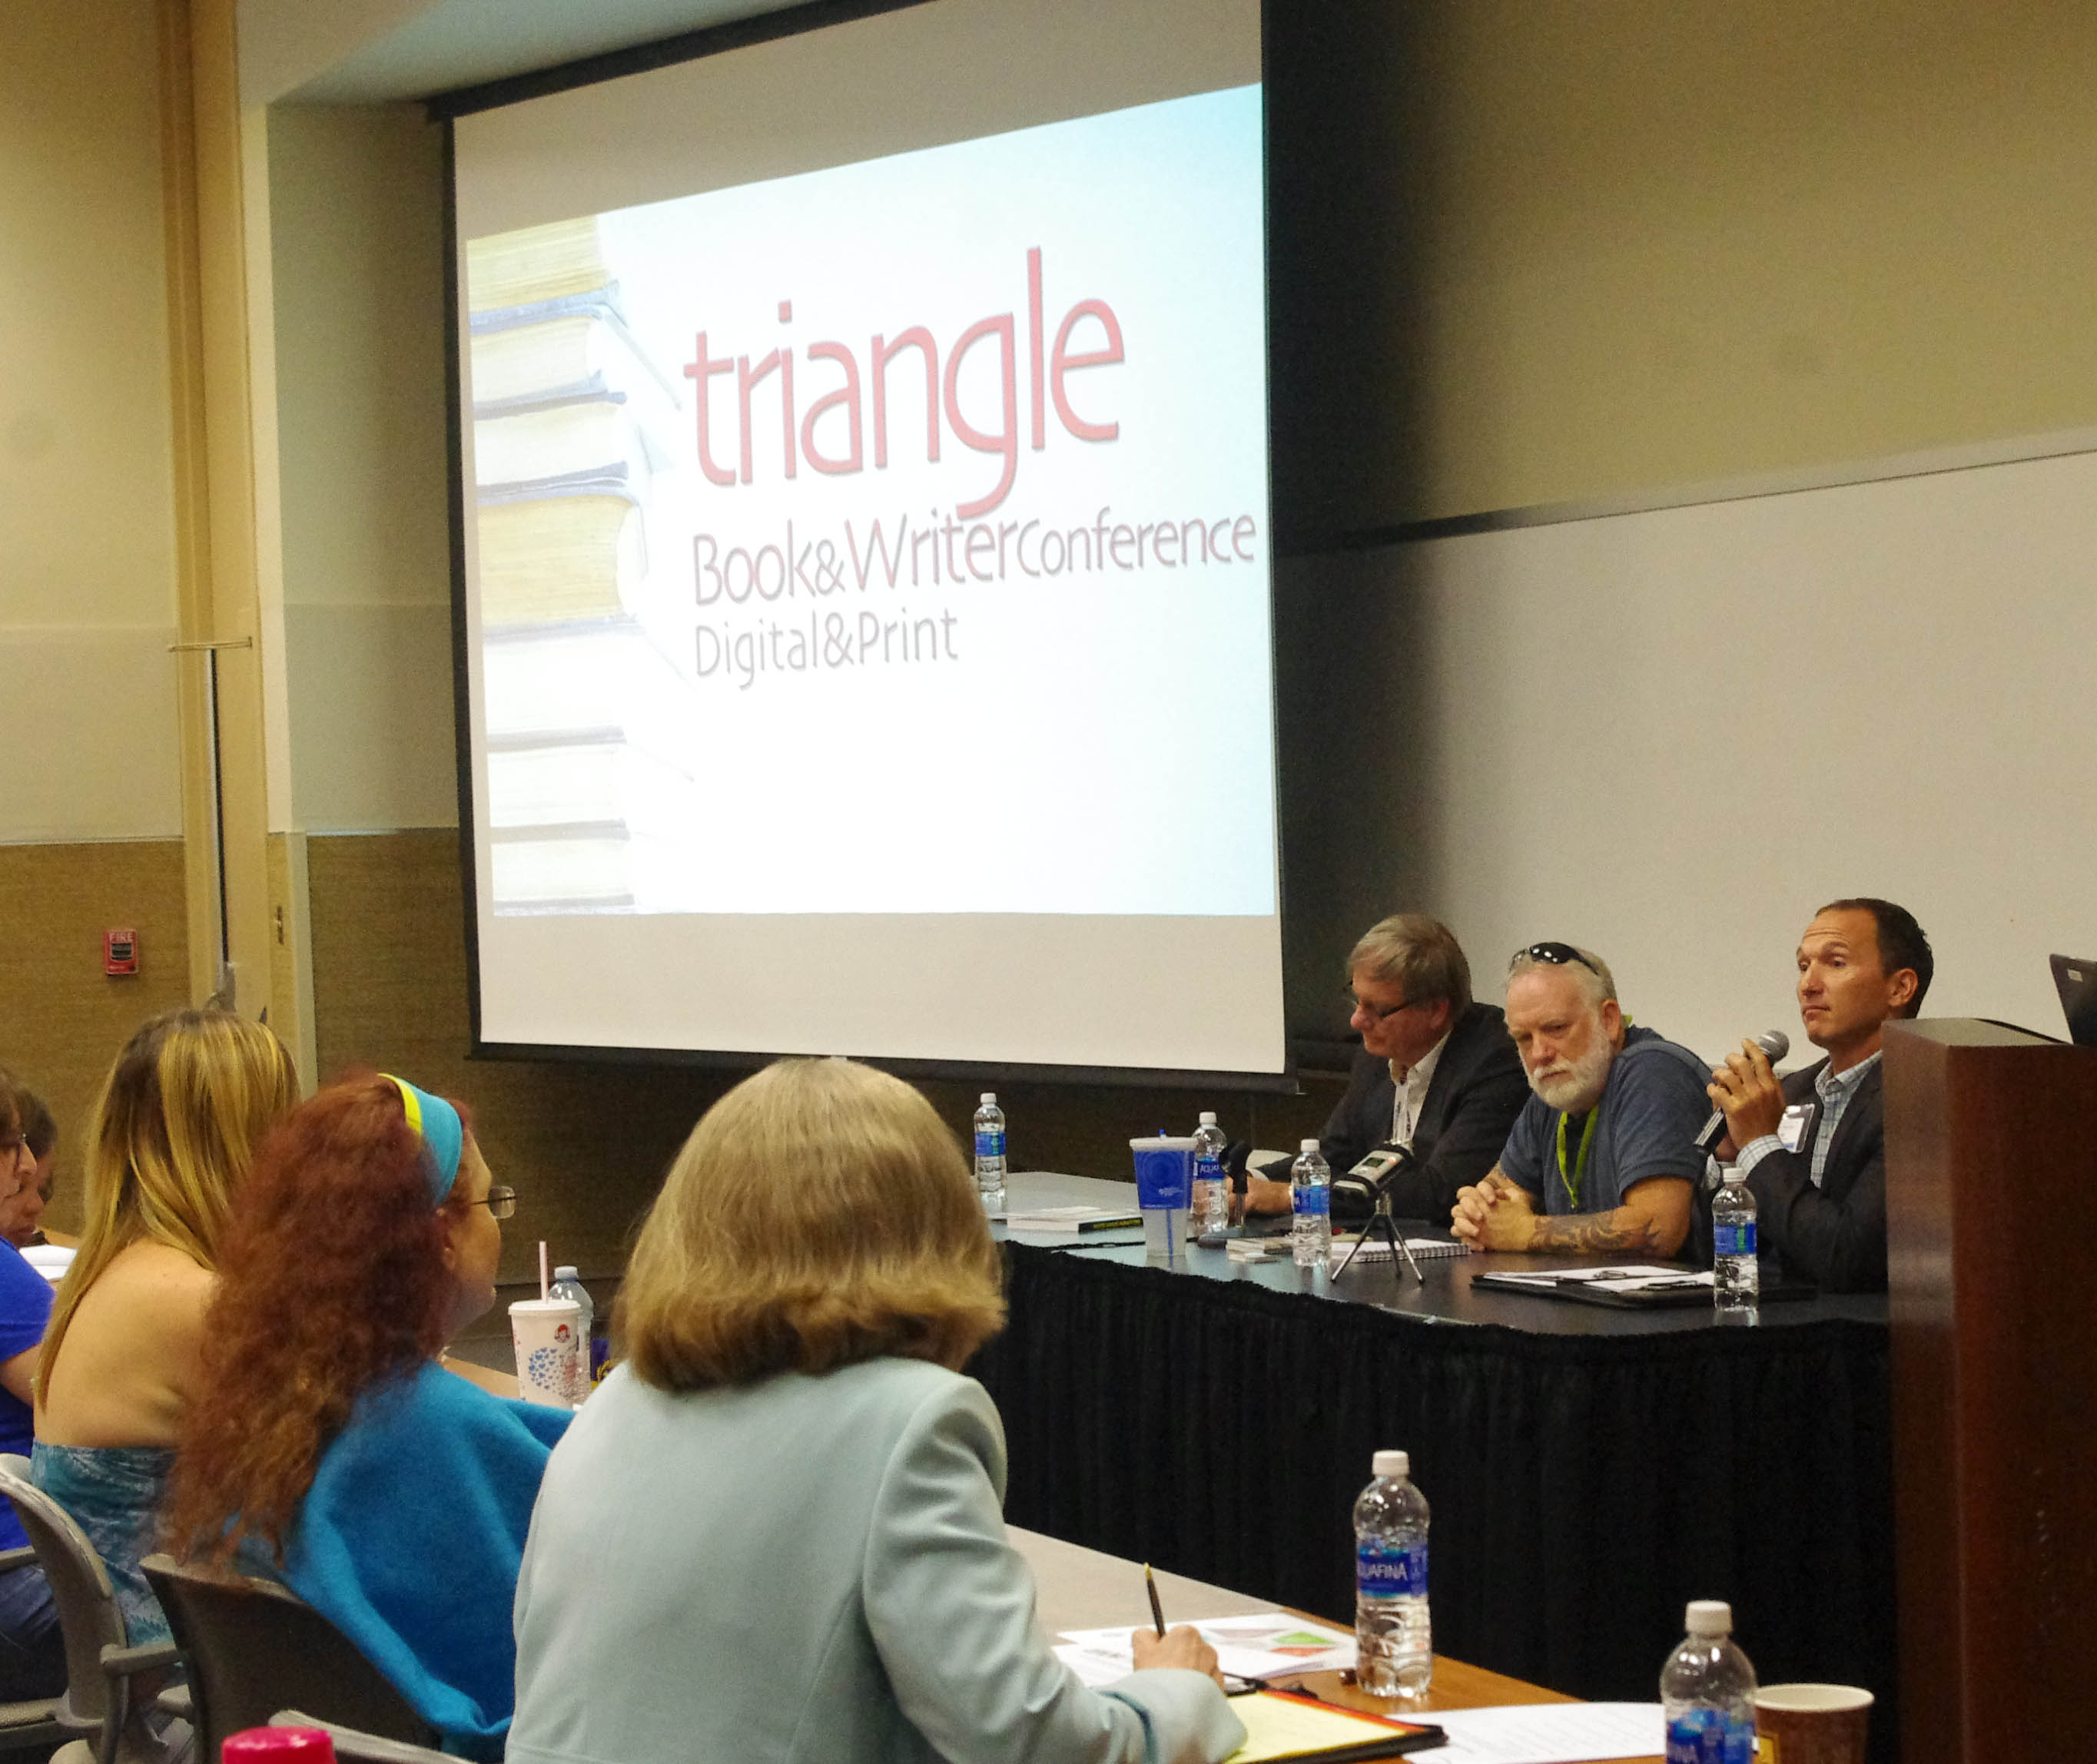 Fourth Annual Carolina Book and Writer Conference Features Keynote Speaker Larry Perkins, PNC Arena Vice President, and New Romance Author and Children’s Book Author Panels